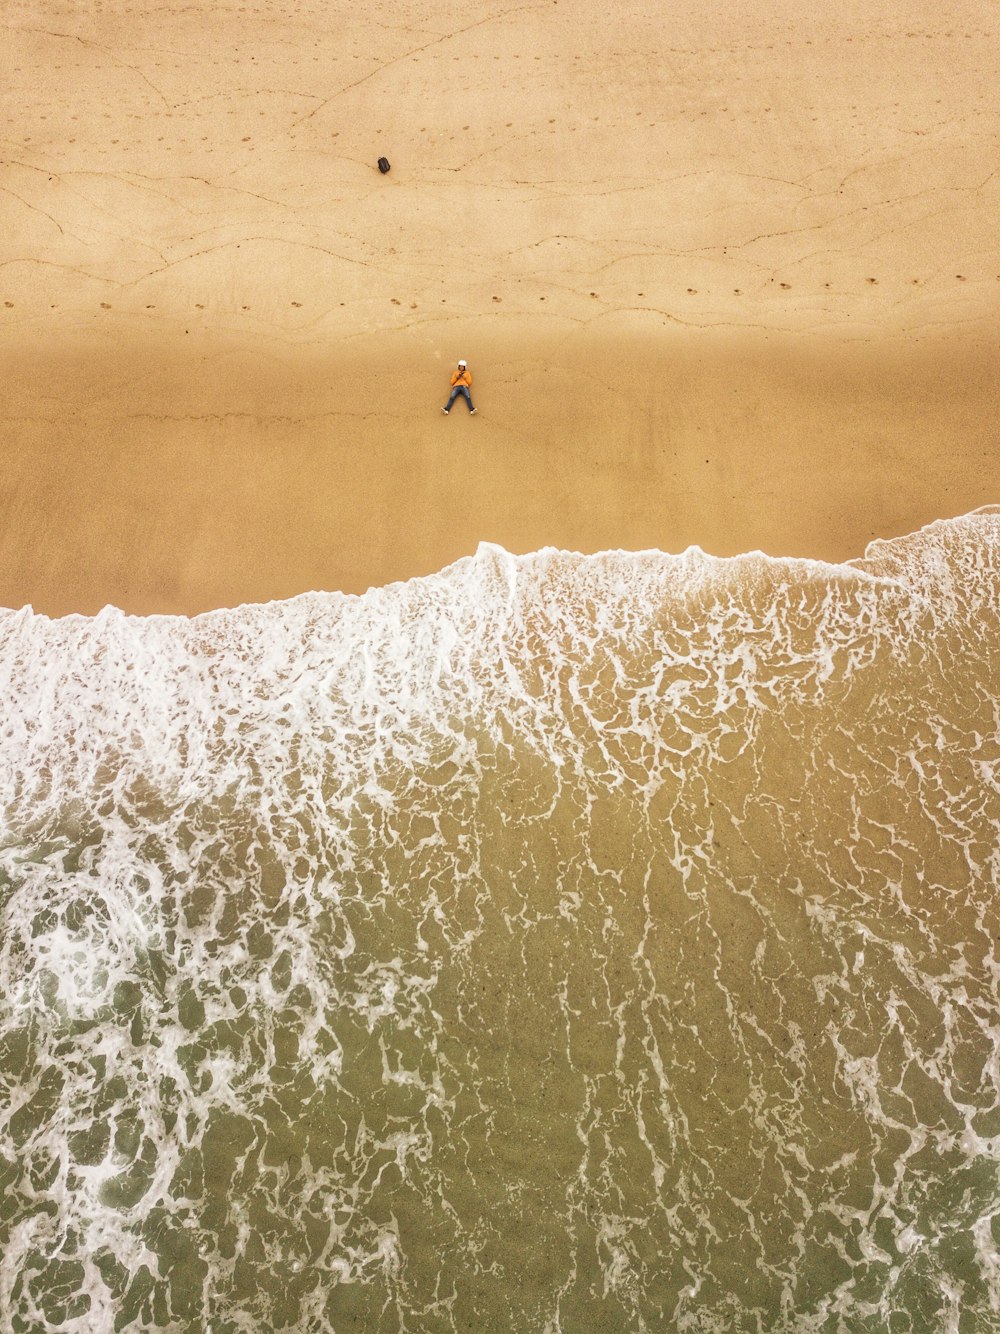 a person walking on a beach next to the ocean